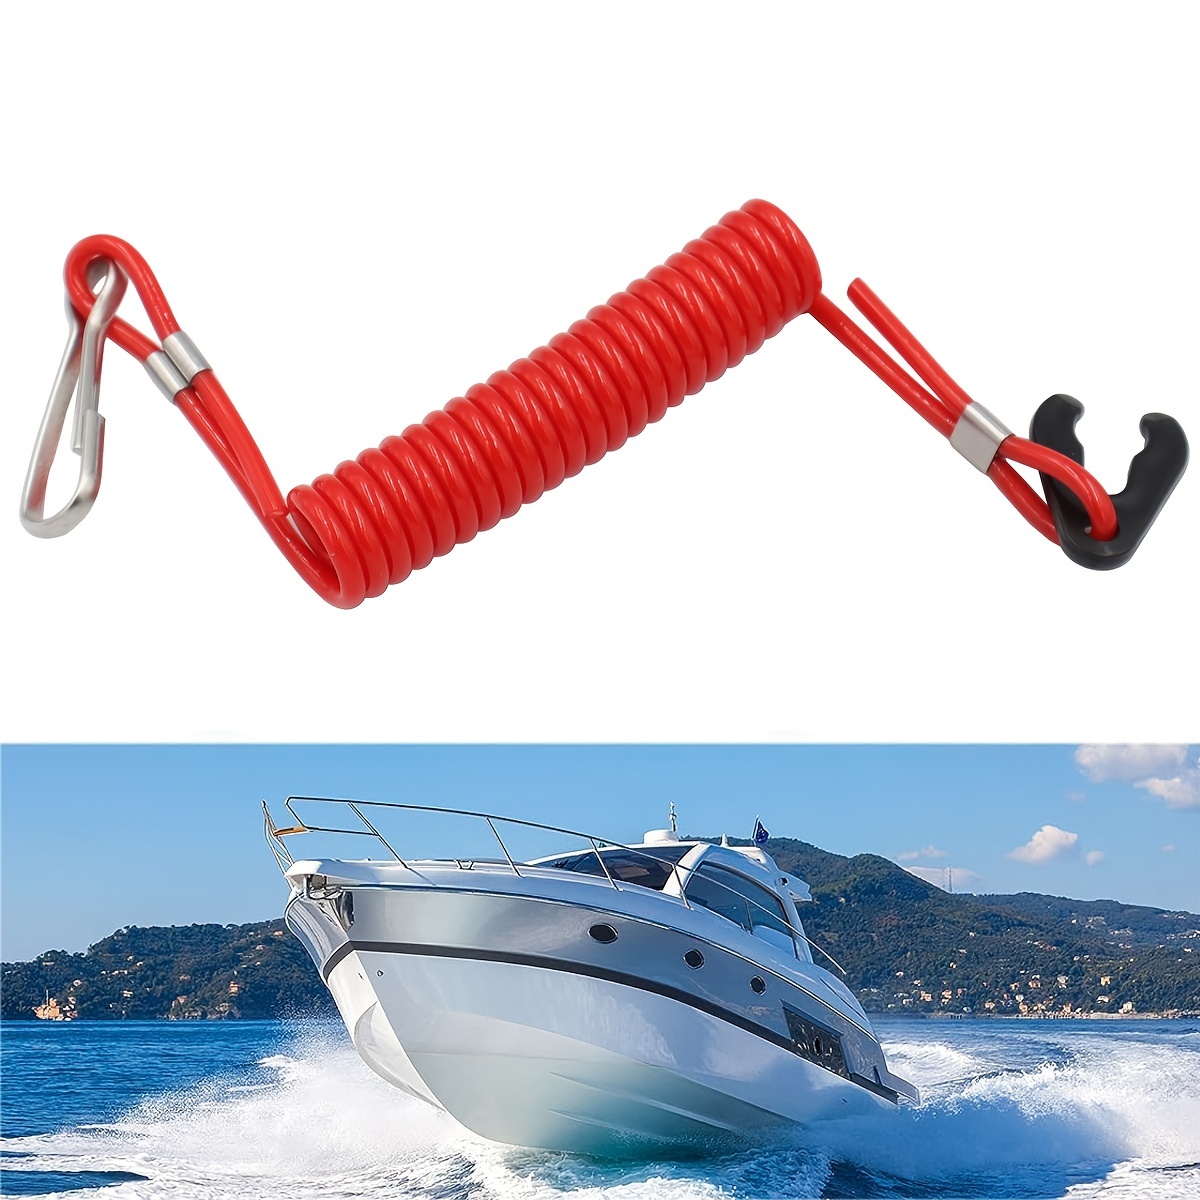 

Boat Engine Kill Switch Lanyard For Emergency Engine Stop, Crucial Outboard Motor Safety For Tohatsu Pwc Jet Skis 682-82556-00-00